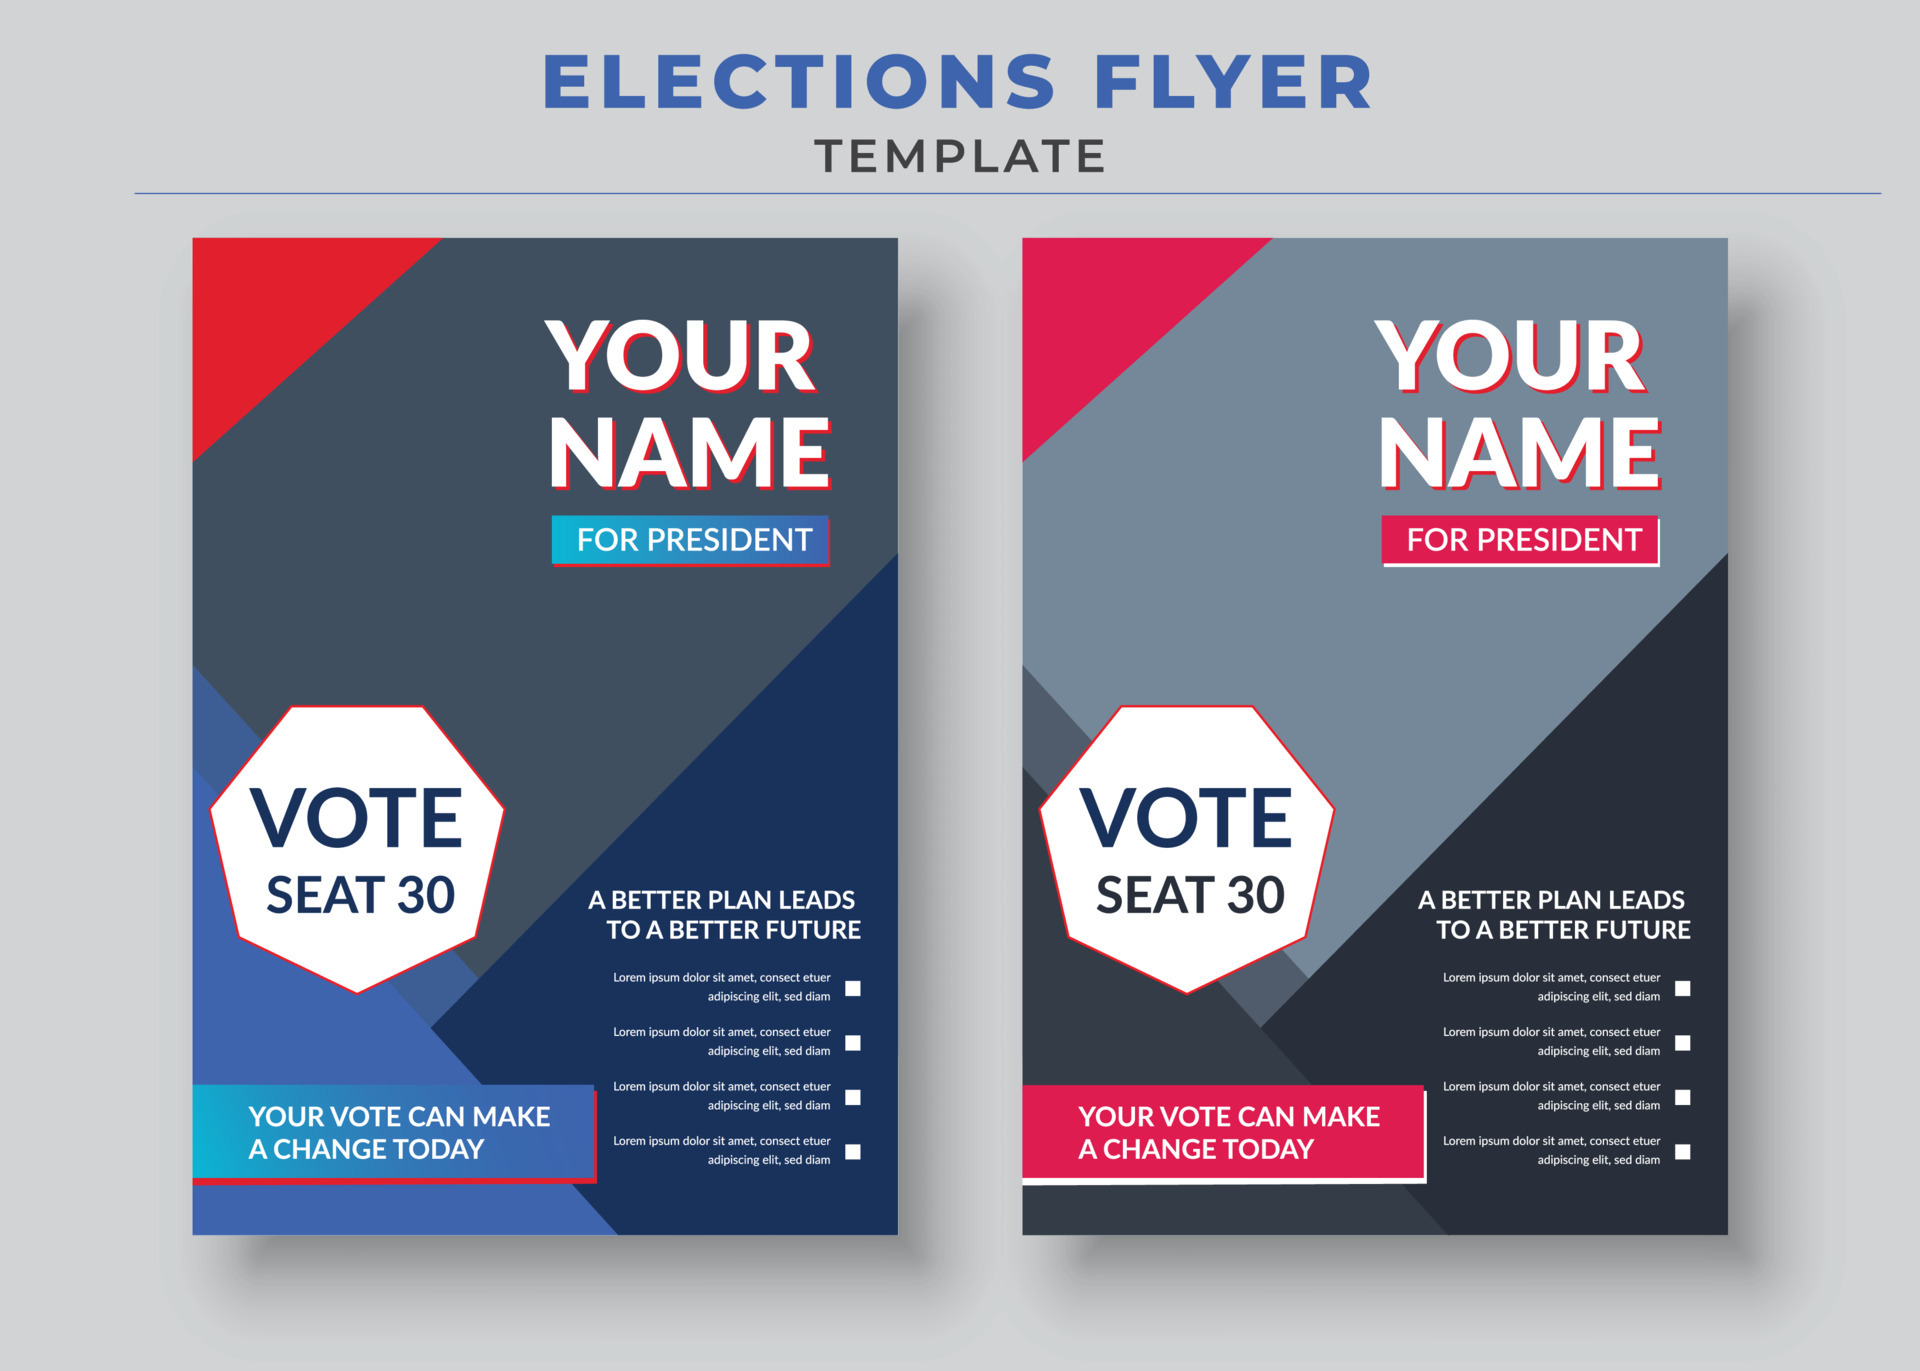 Elections Flyer Template, Political Flyer, Vote Flyer 20 In Vote Flyer Template